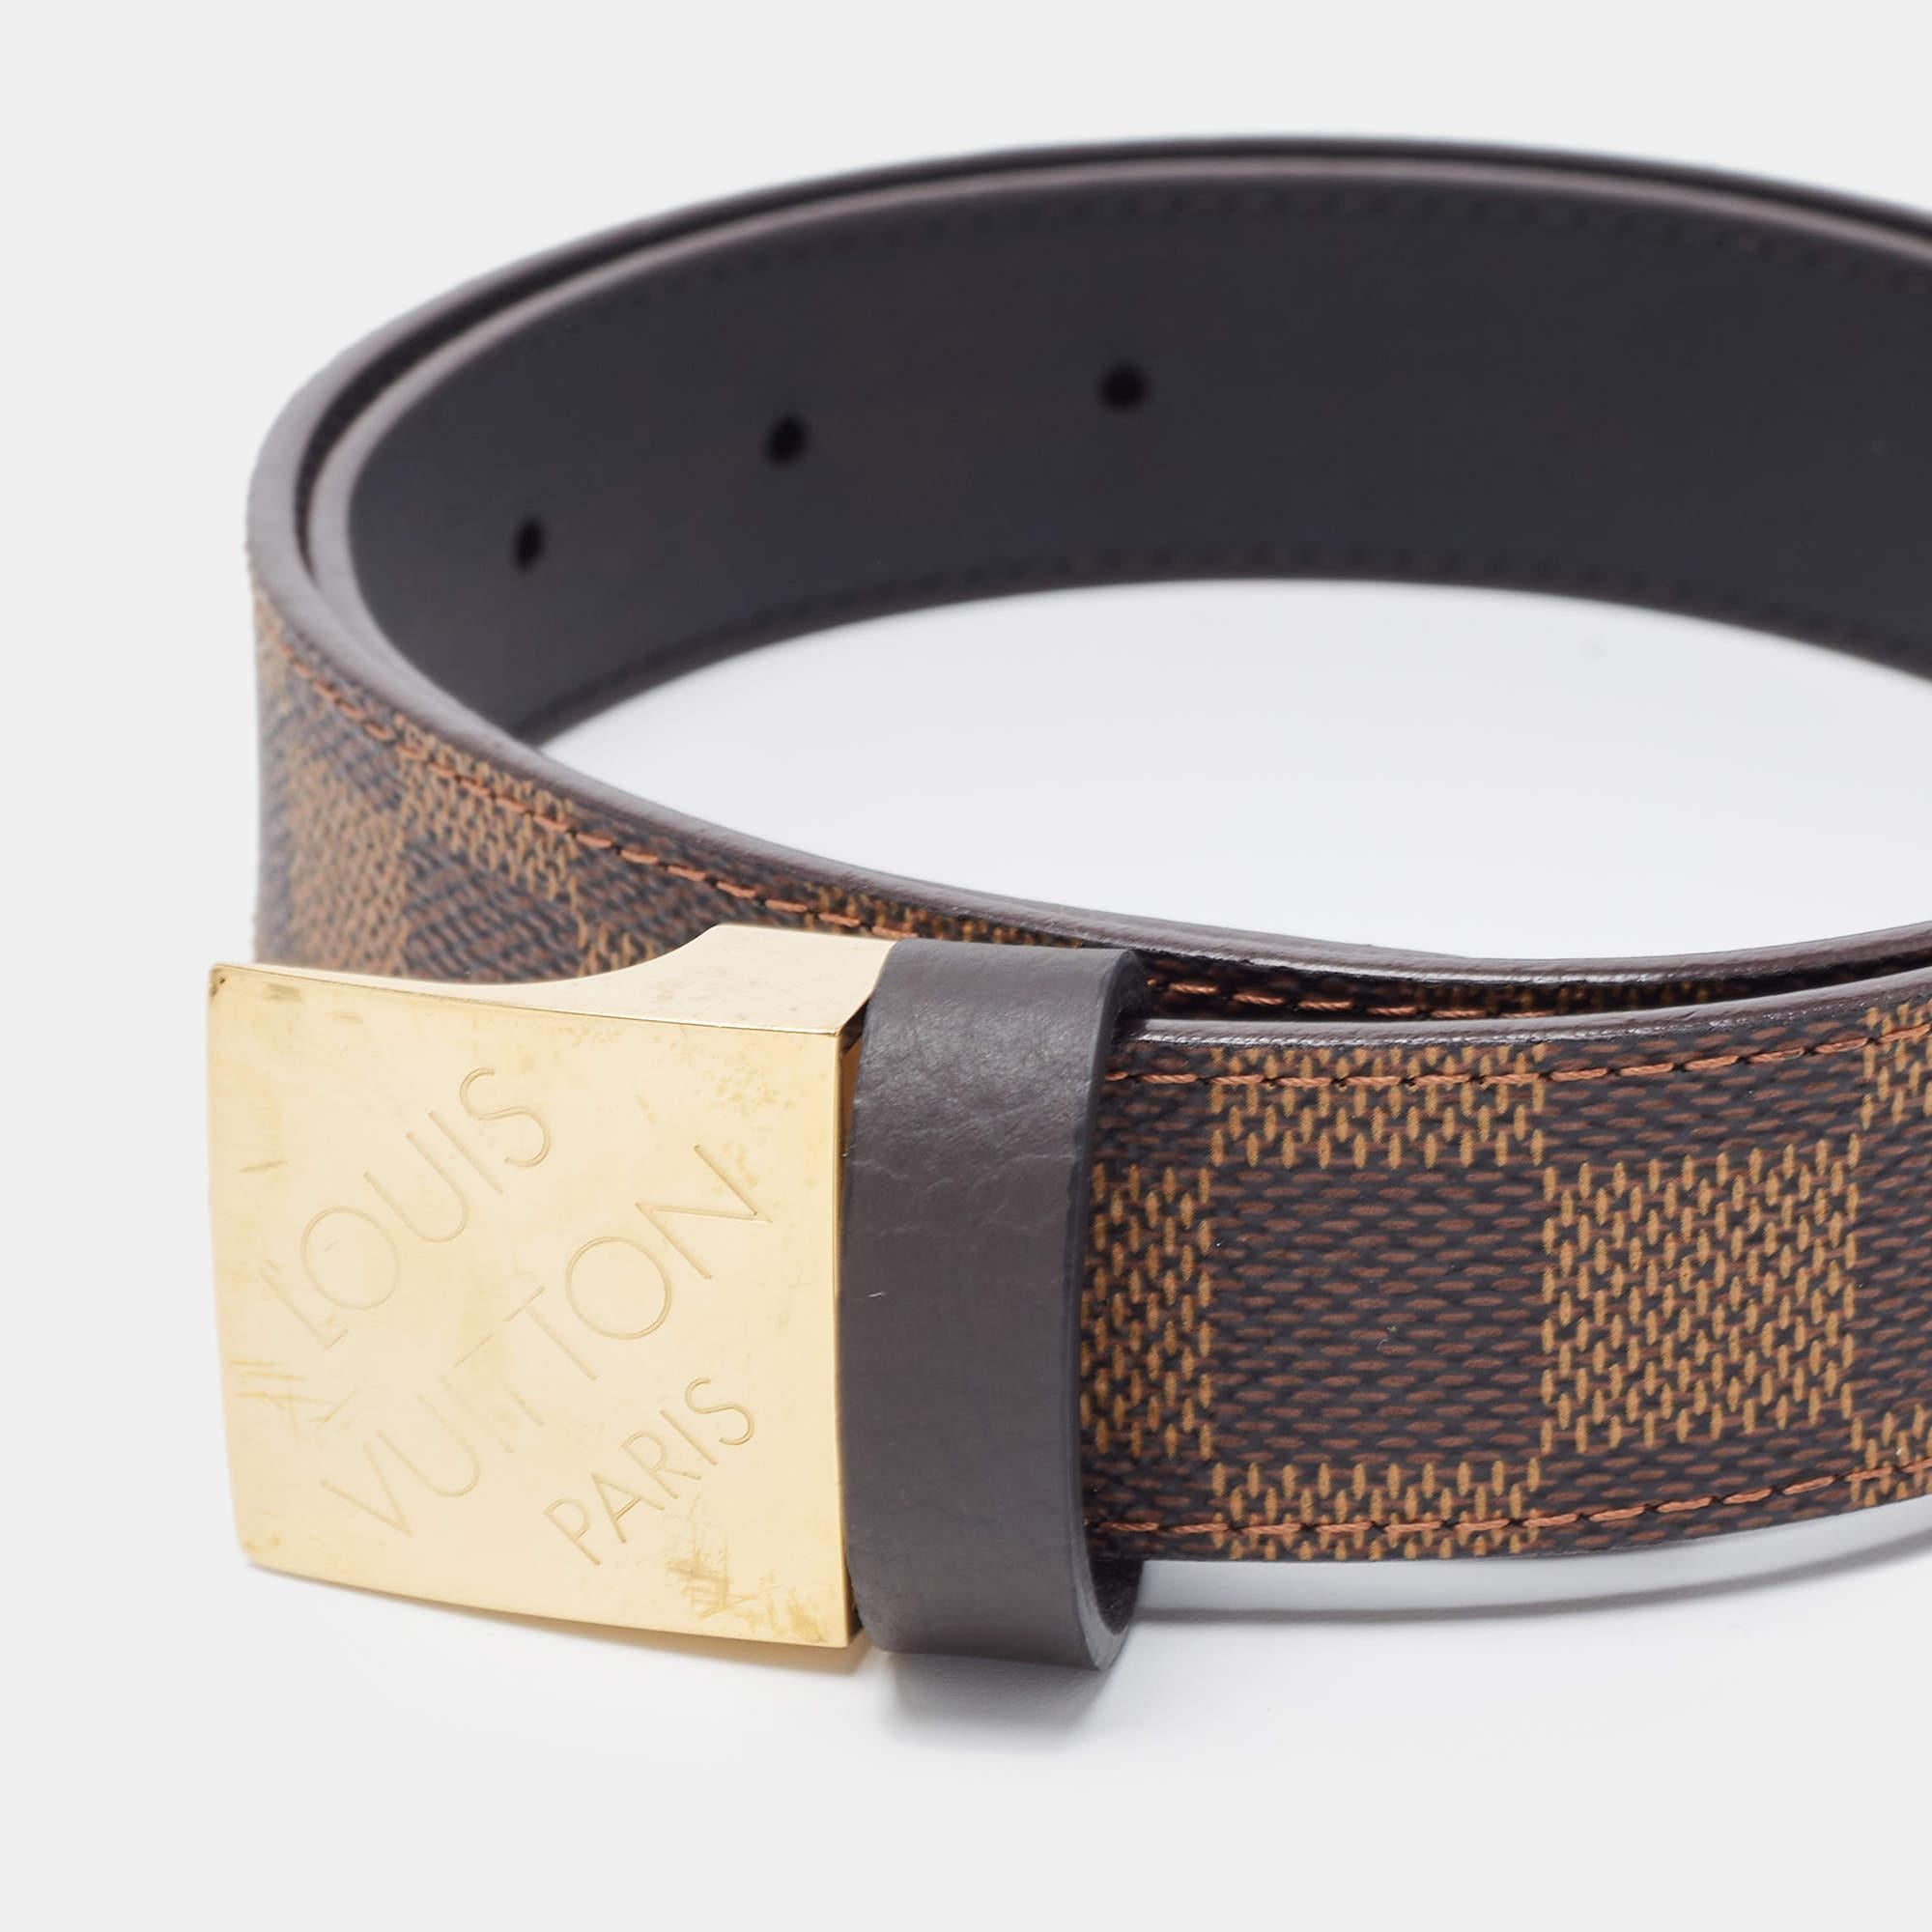 This belt from Louis Vuitton is crafted with Damier Ebene canvas and elevated with gold-tone metal ccents. The brown hue will surely complement any ensemble, while the metal buckle emulates the signature style. Style yours with a pair of casual